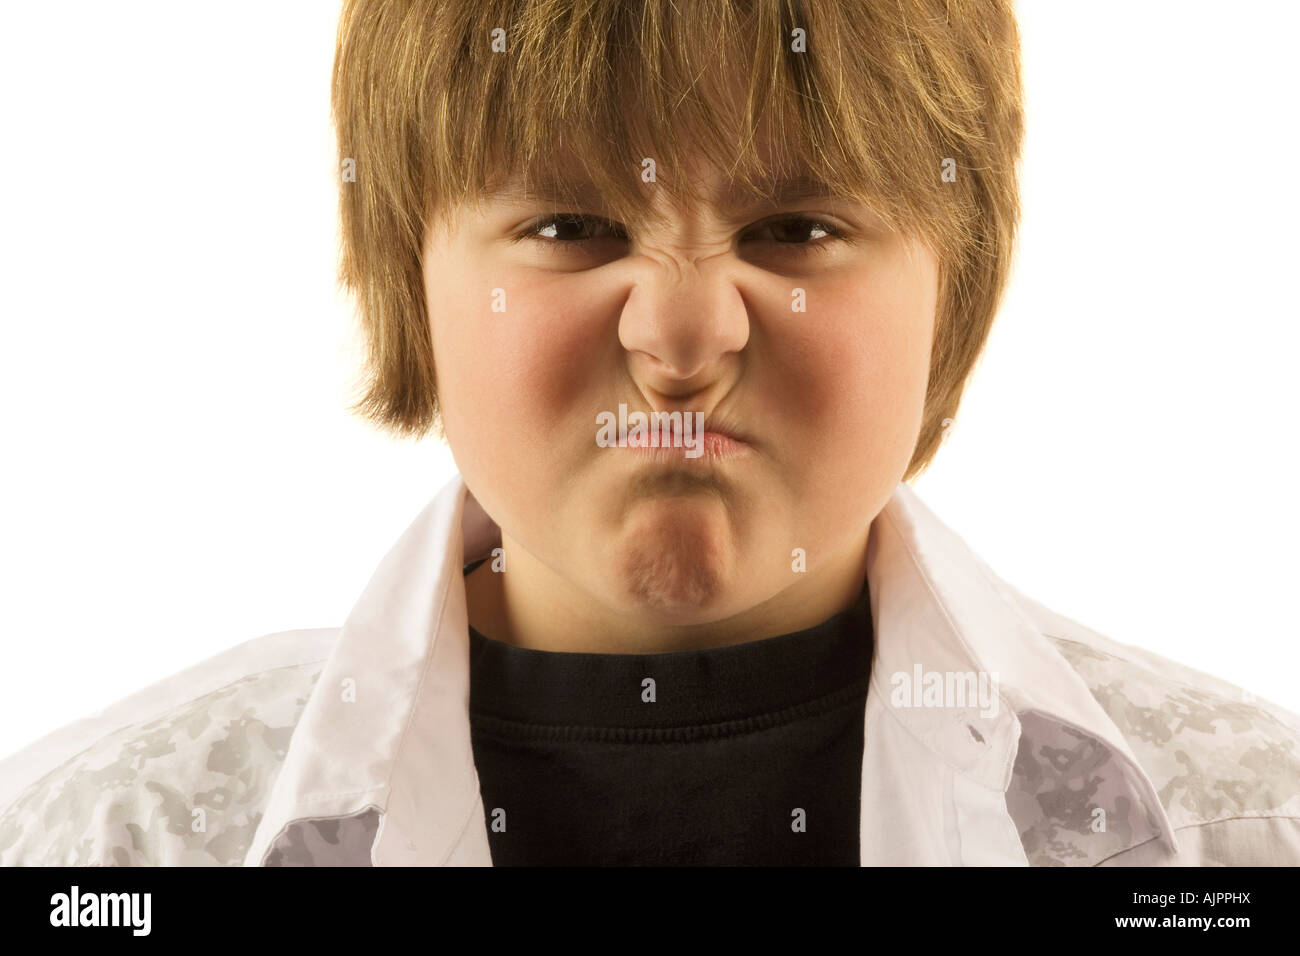 Young boy making silly face Stock Photo